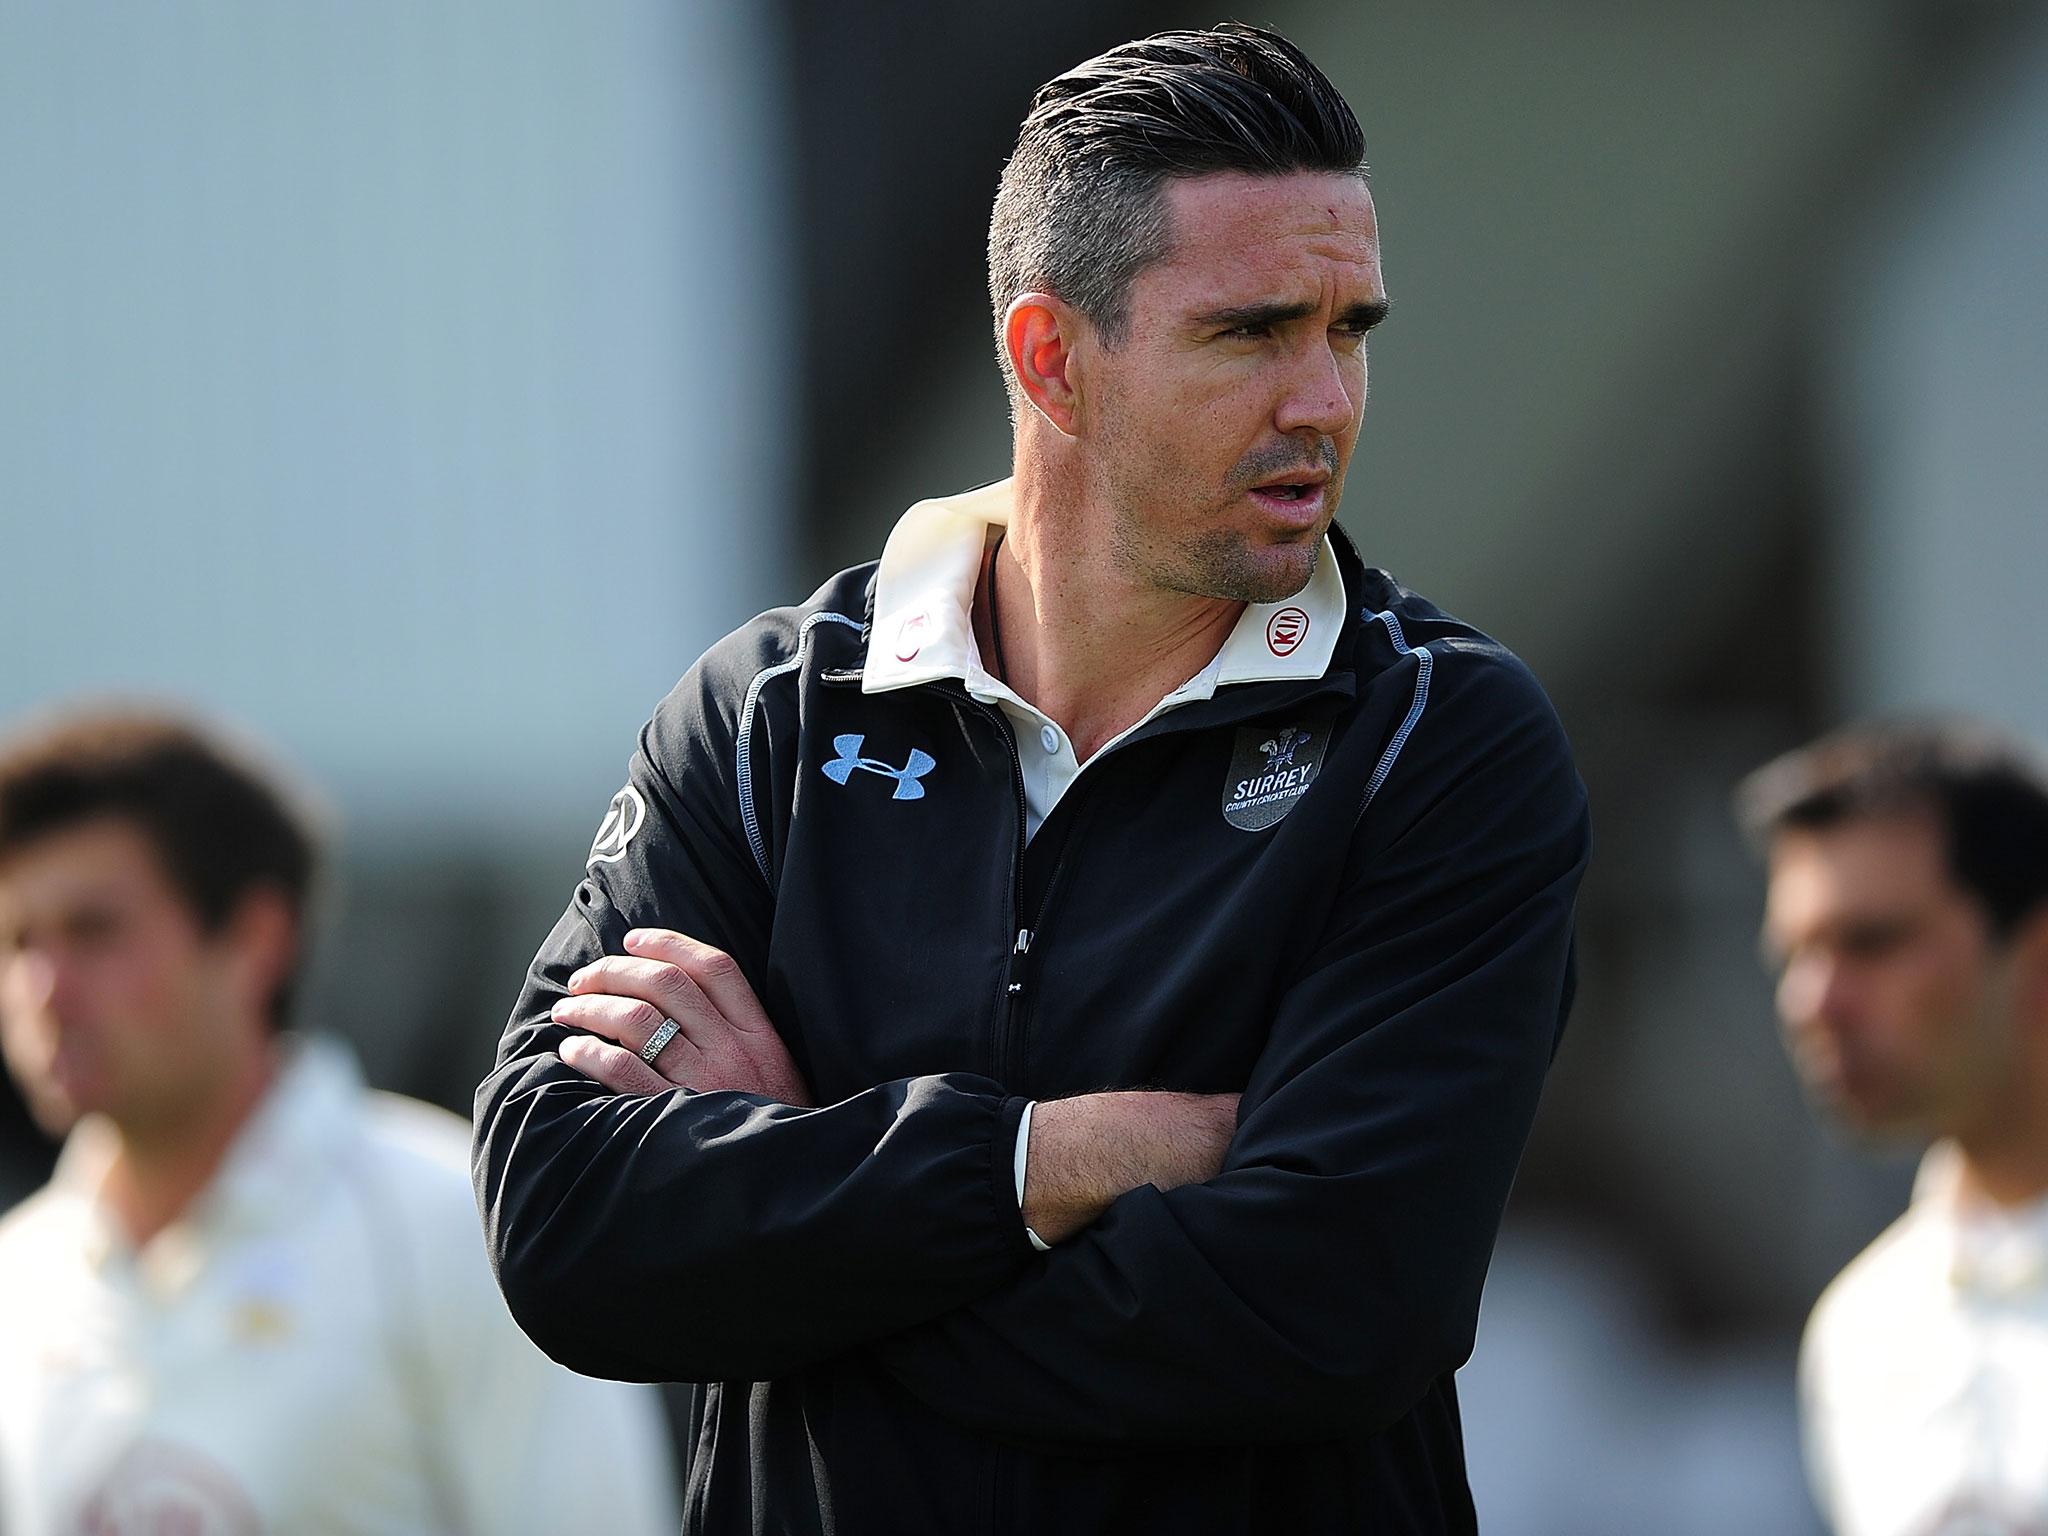 Pietersen has rejoined Surrey for this year's T20